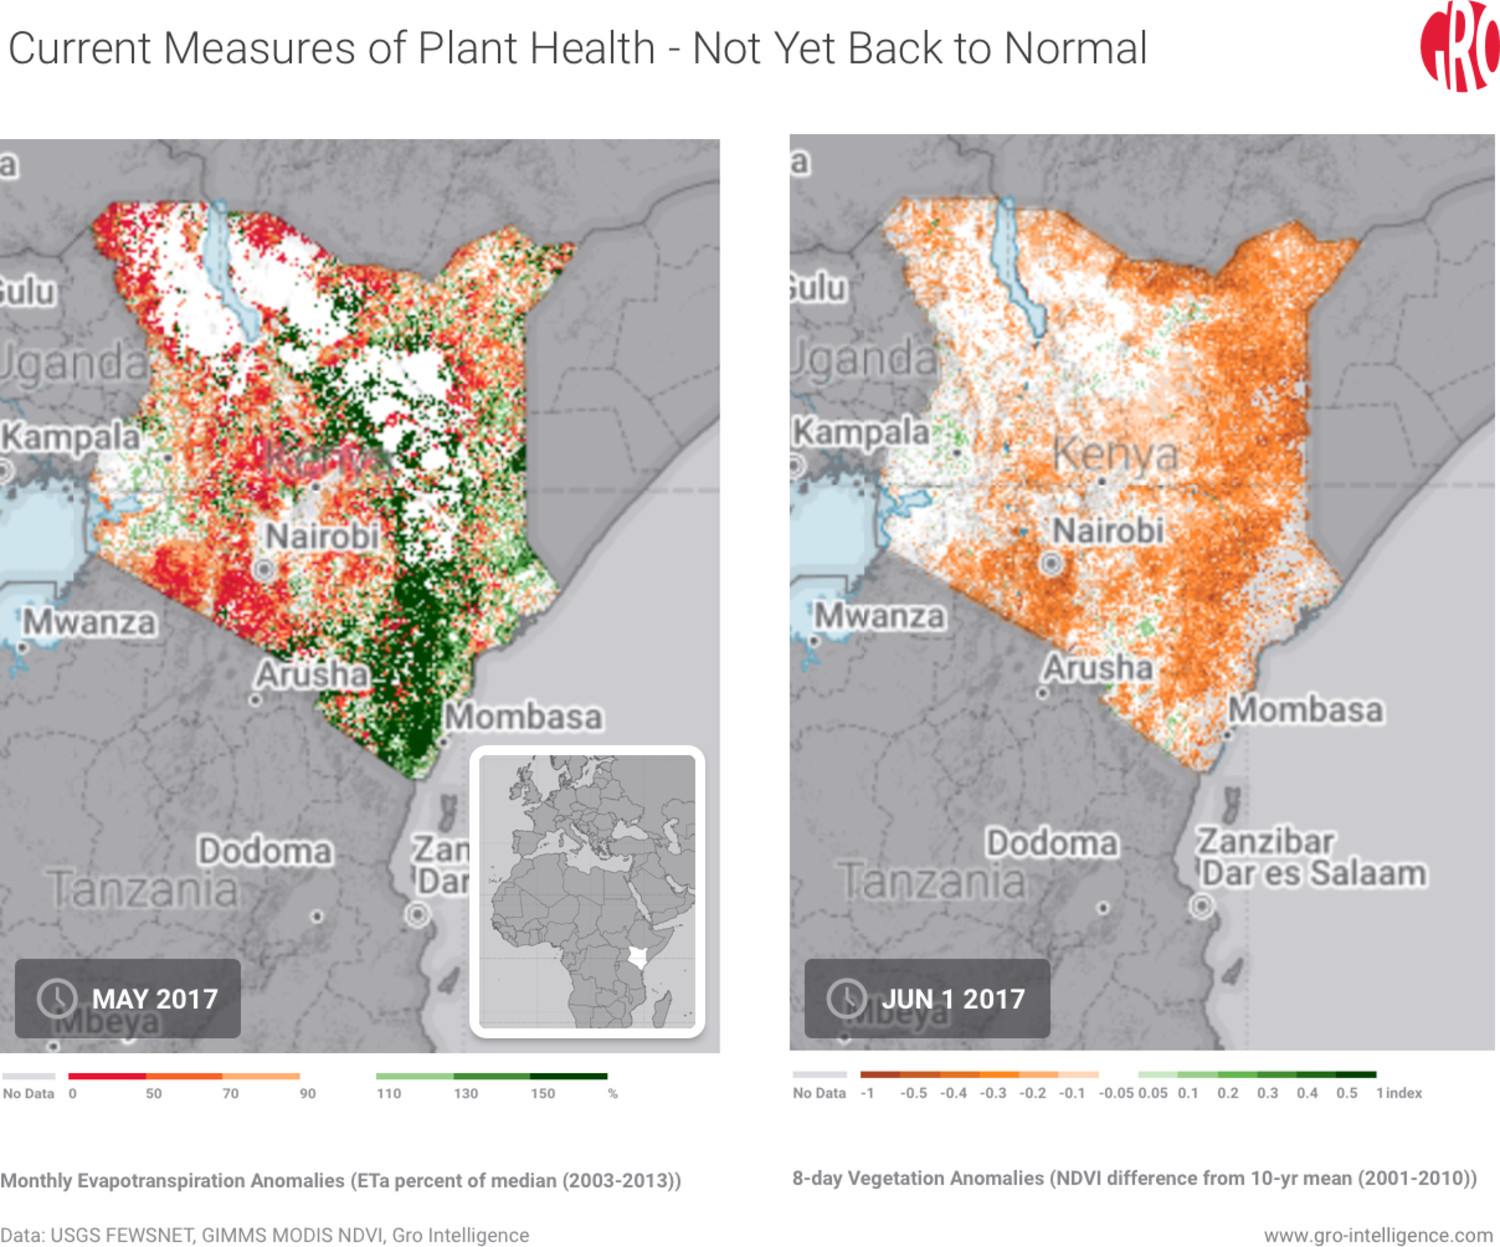 Current Measures of Plant Health - Not Yet Back to Normal